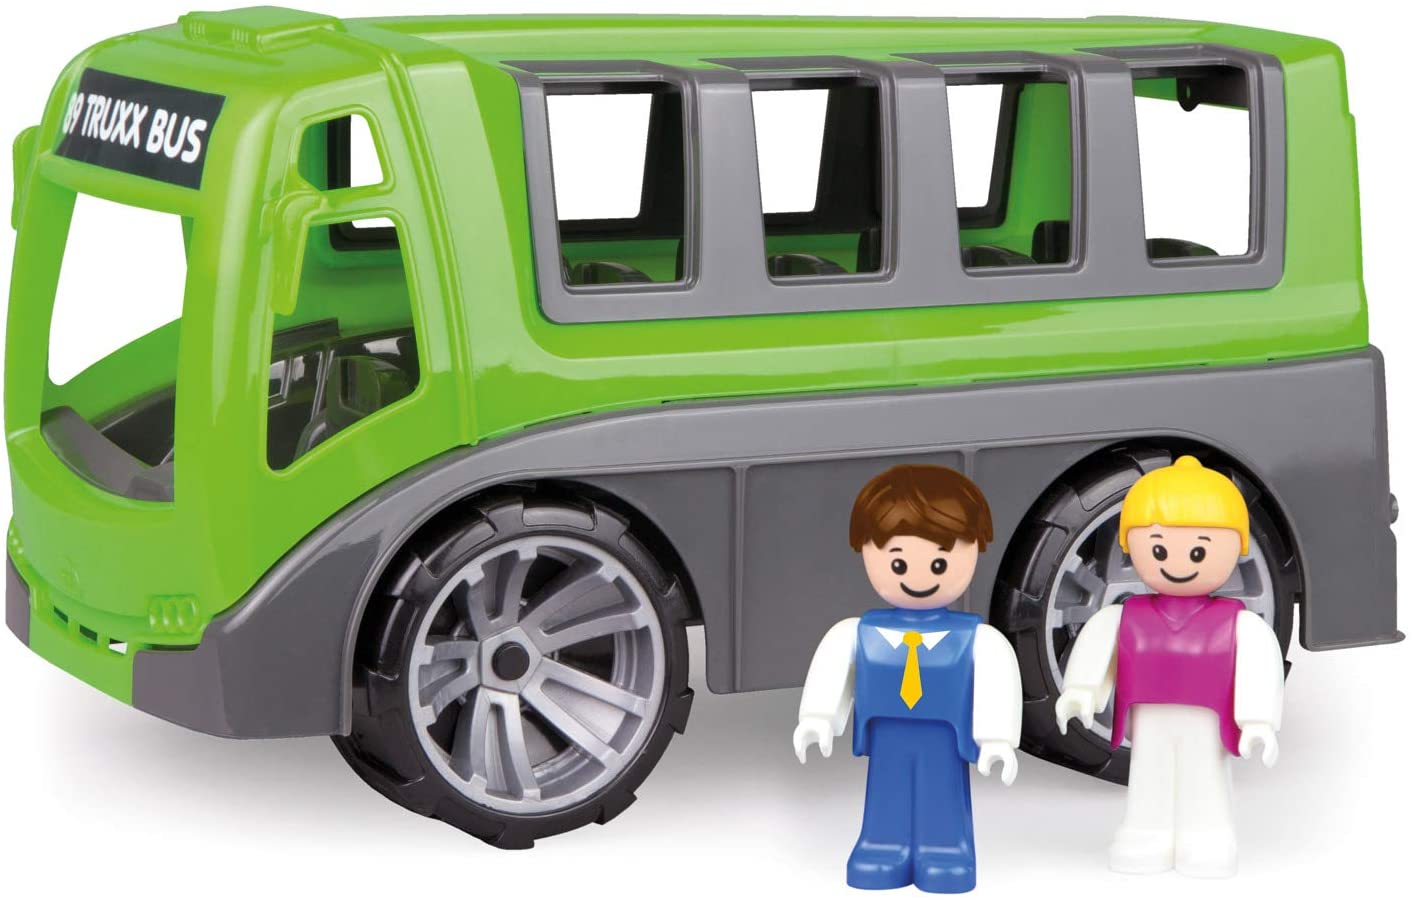 Lena Truxx 04456 Ambulance Vehicle with Toy Figure as Paramedic and Hospital Carrier, Hospital Car with Accessories, Hospital Transporter with Doors to Open, Toy Vehicle for Children from 24 m+